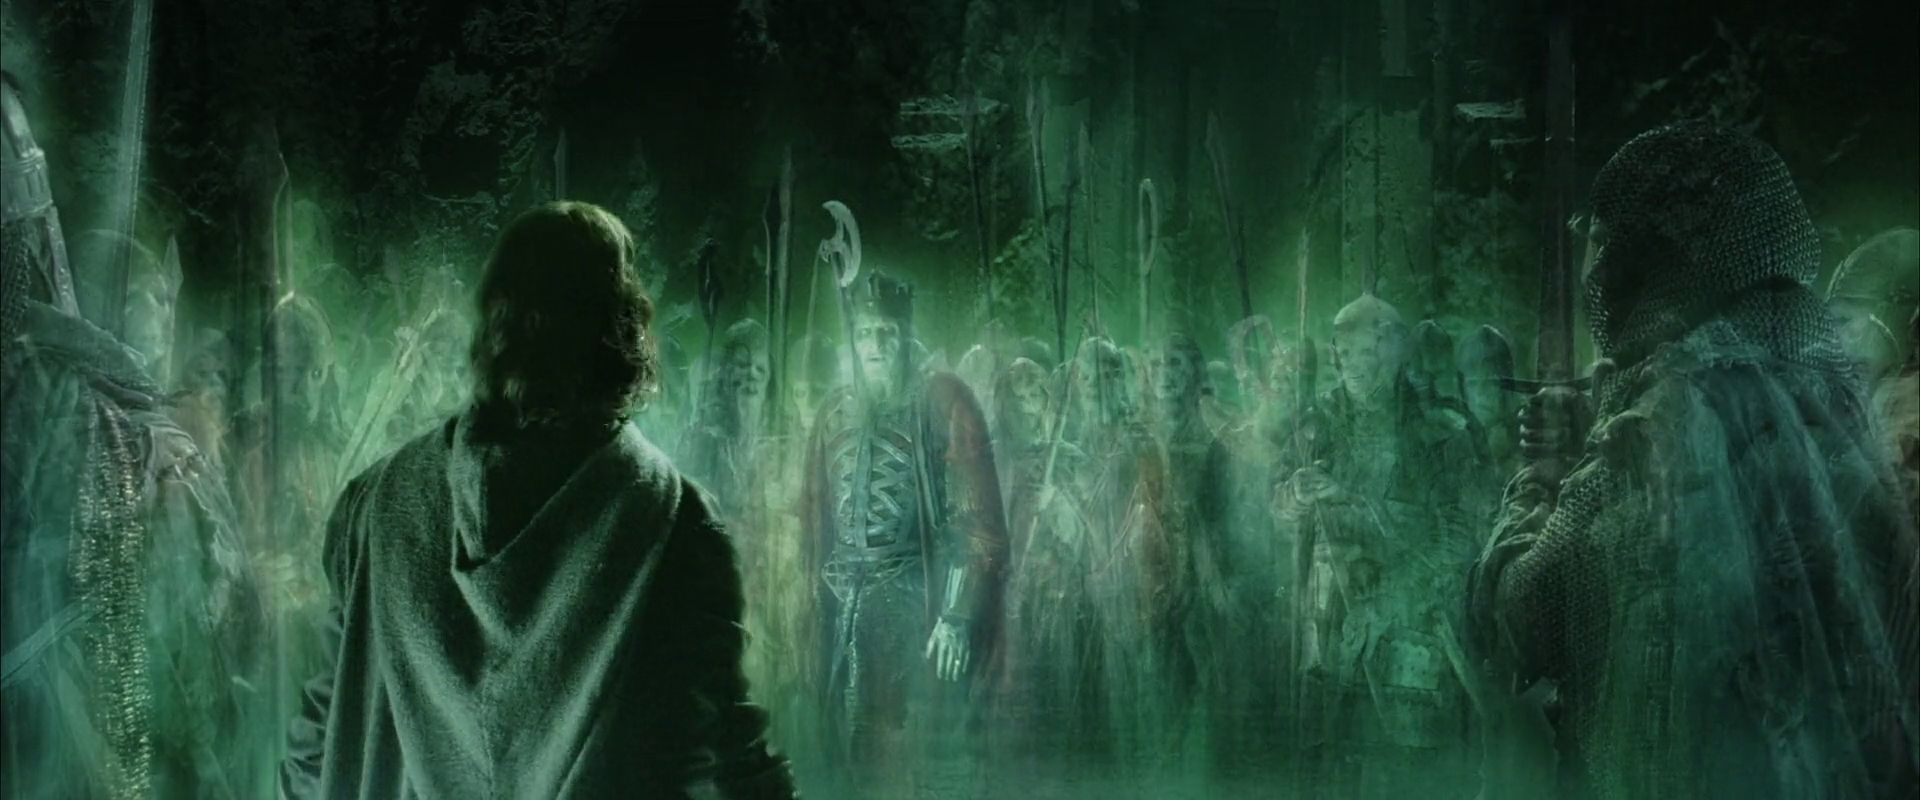 8 Things Peter Jackson Got Wrong About The LOTR Trilogy (And 8 He Got Right)